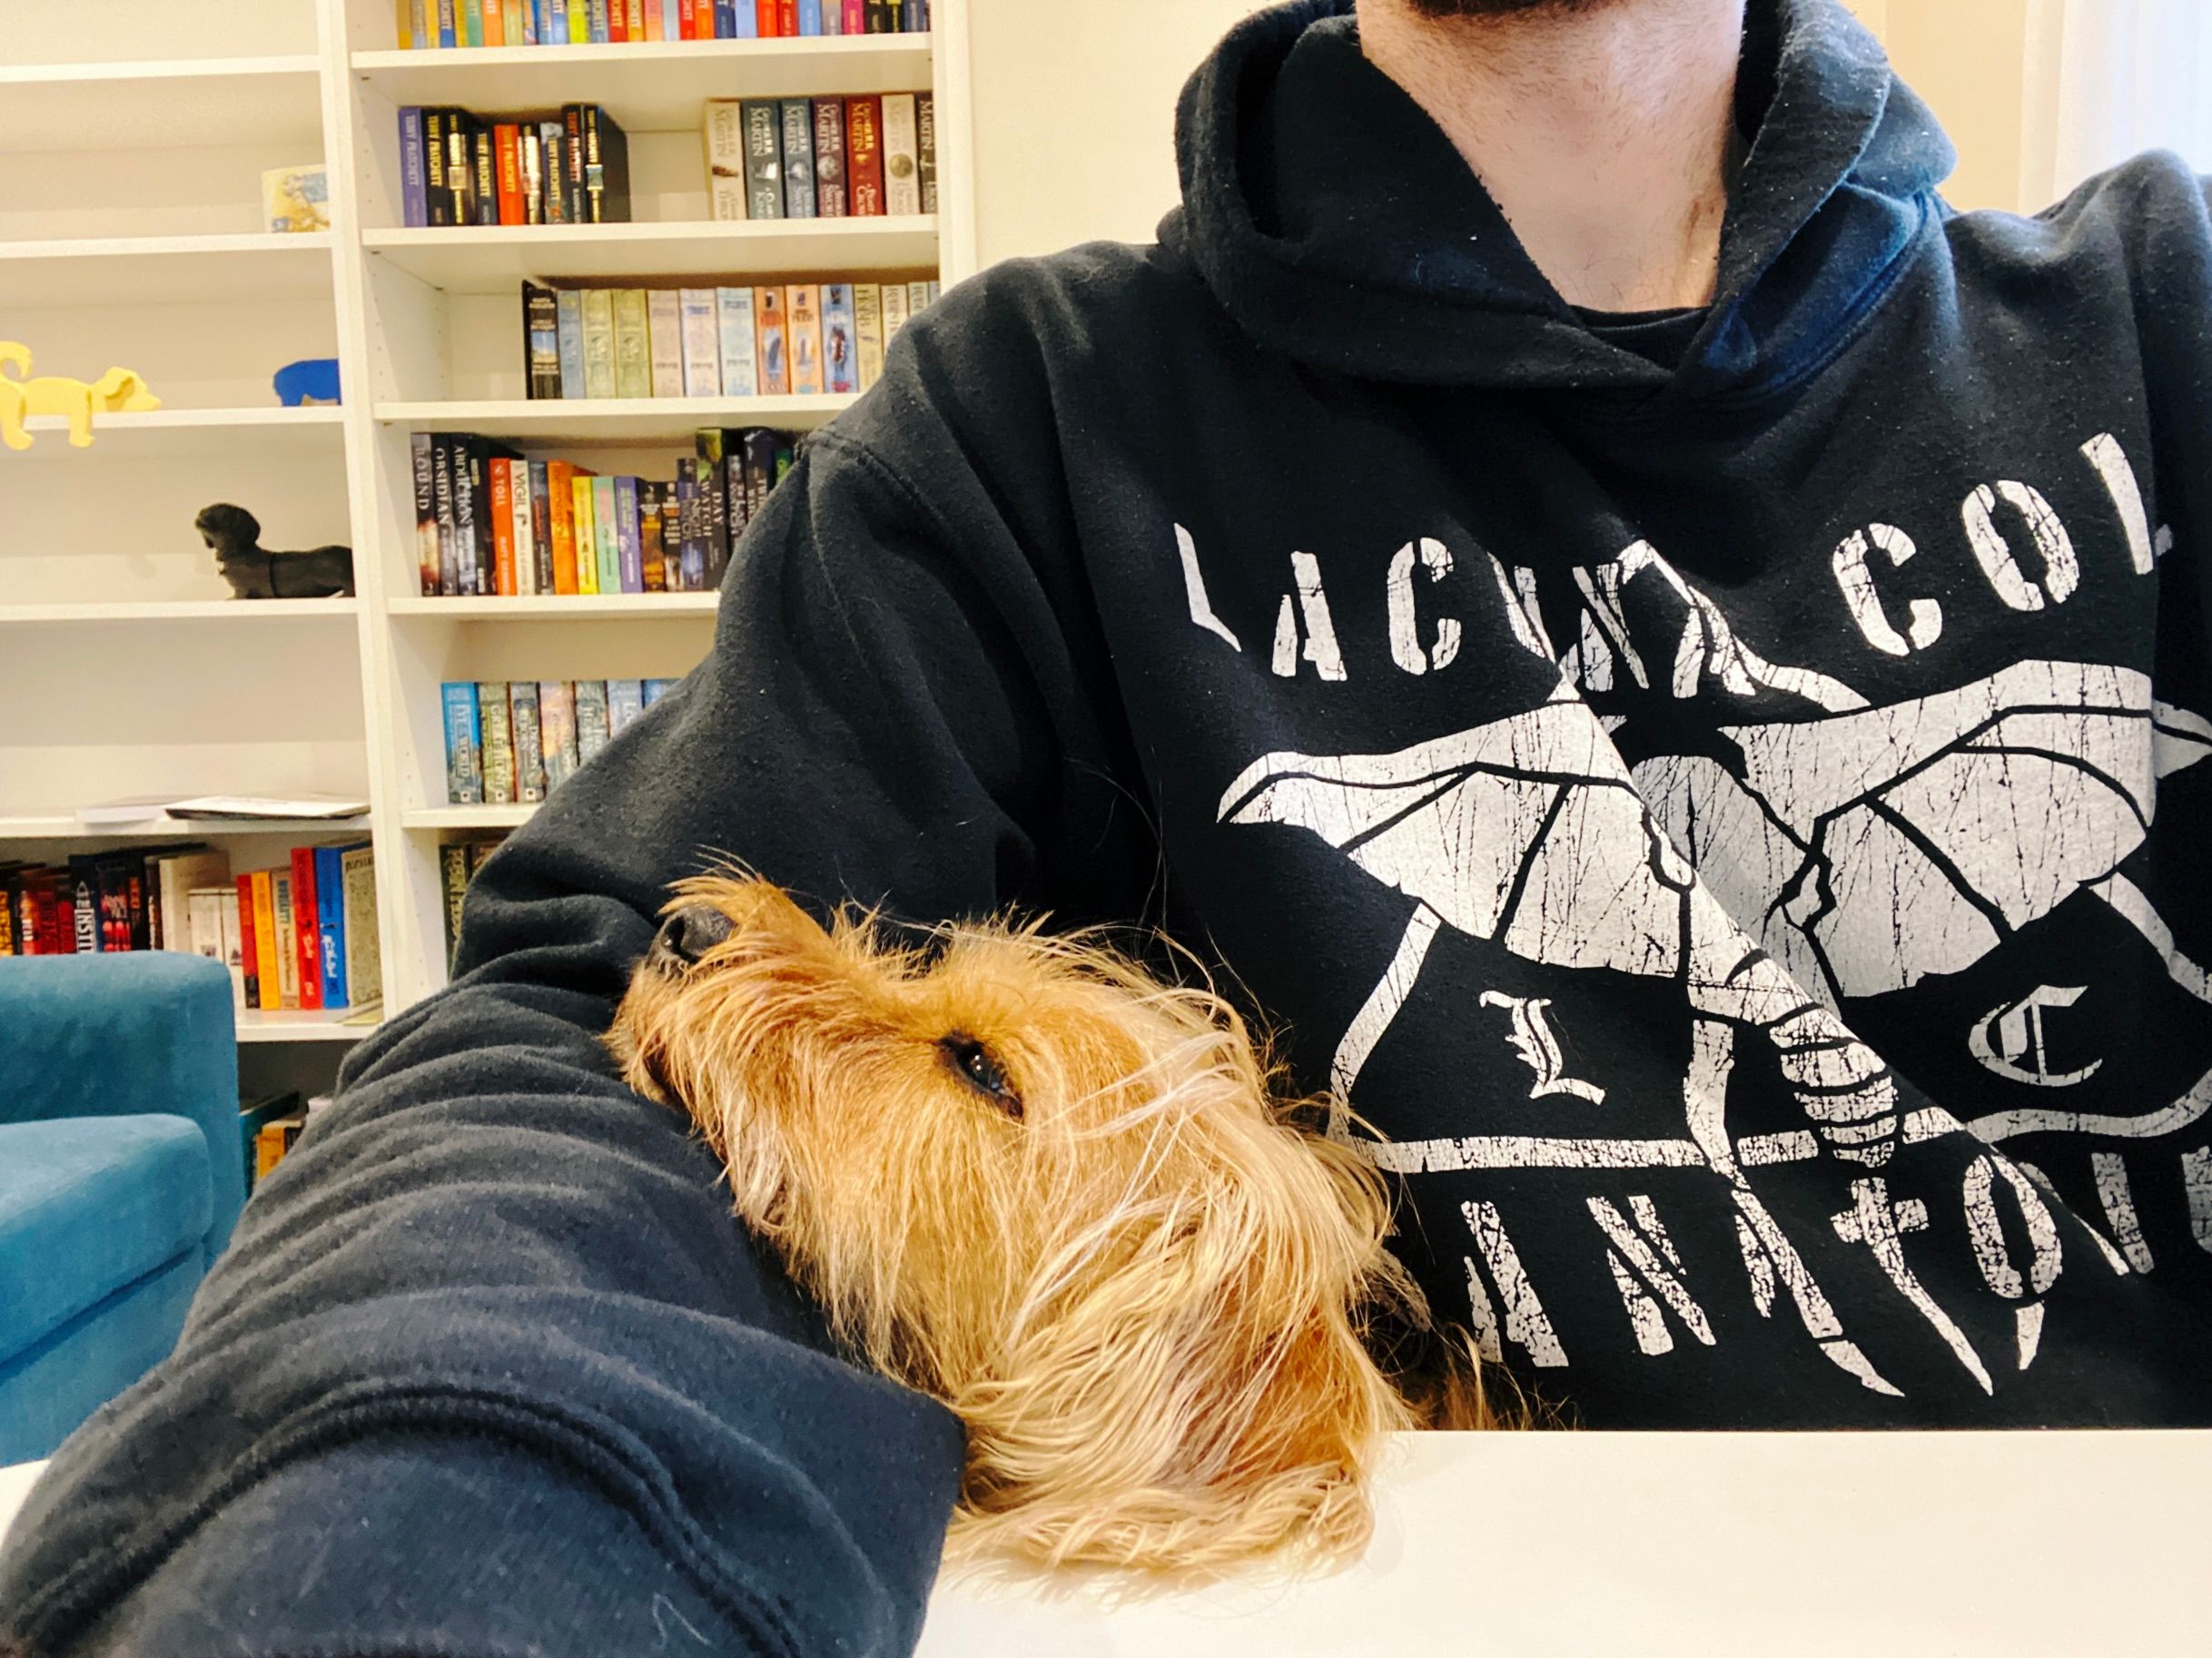 A photo taken with the front-facing camera with me sitting at my desk and the camera aimed at me, with the head of a small scruffy blonde dog popping up from my lap and resting on my arm. His eyes are half-closed.